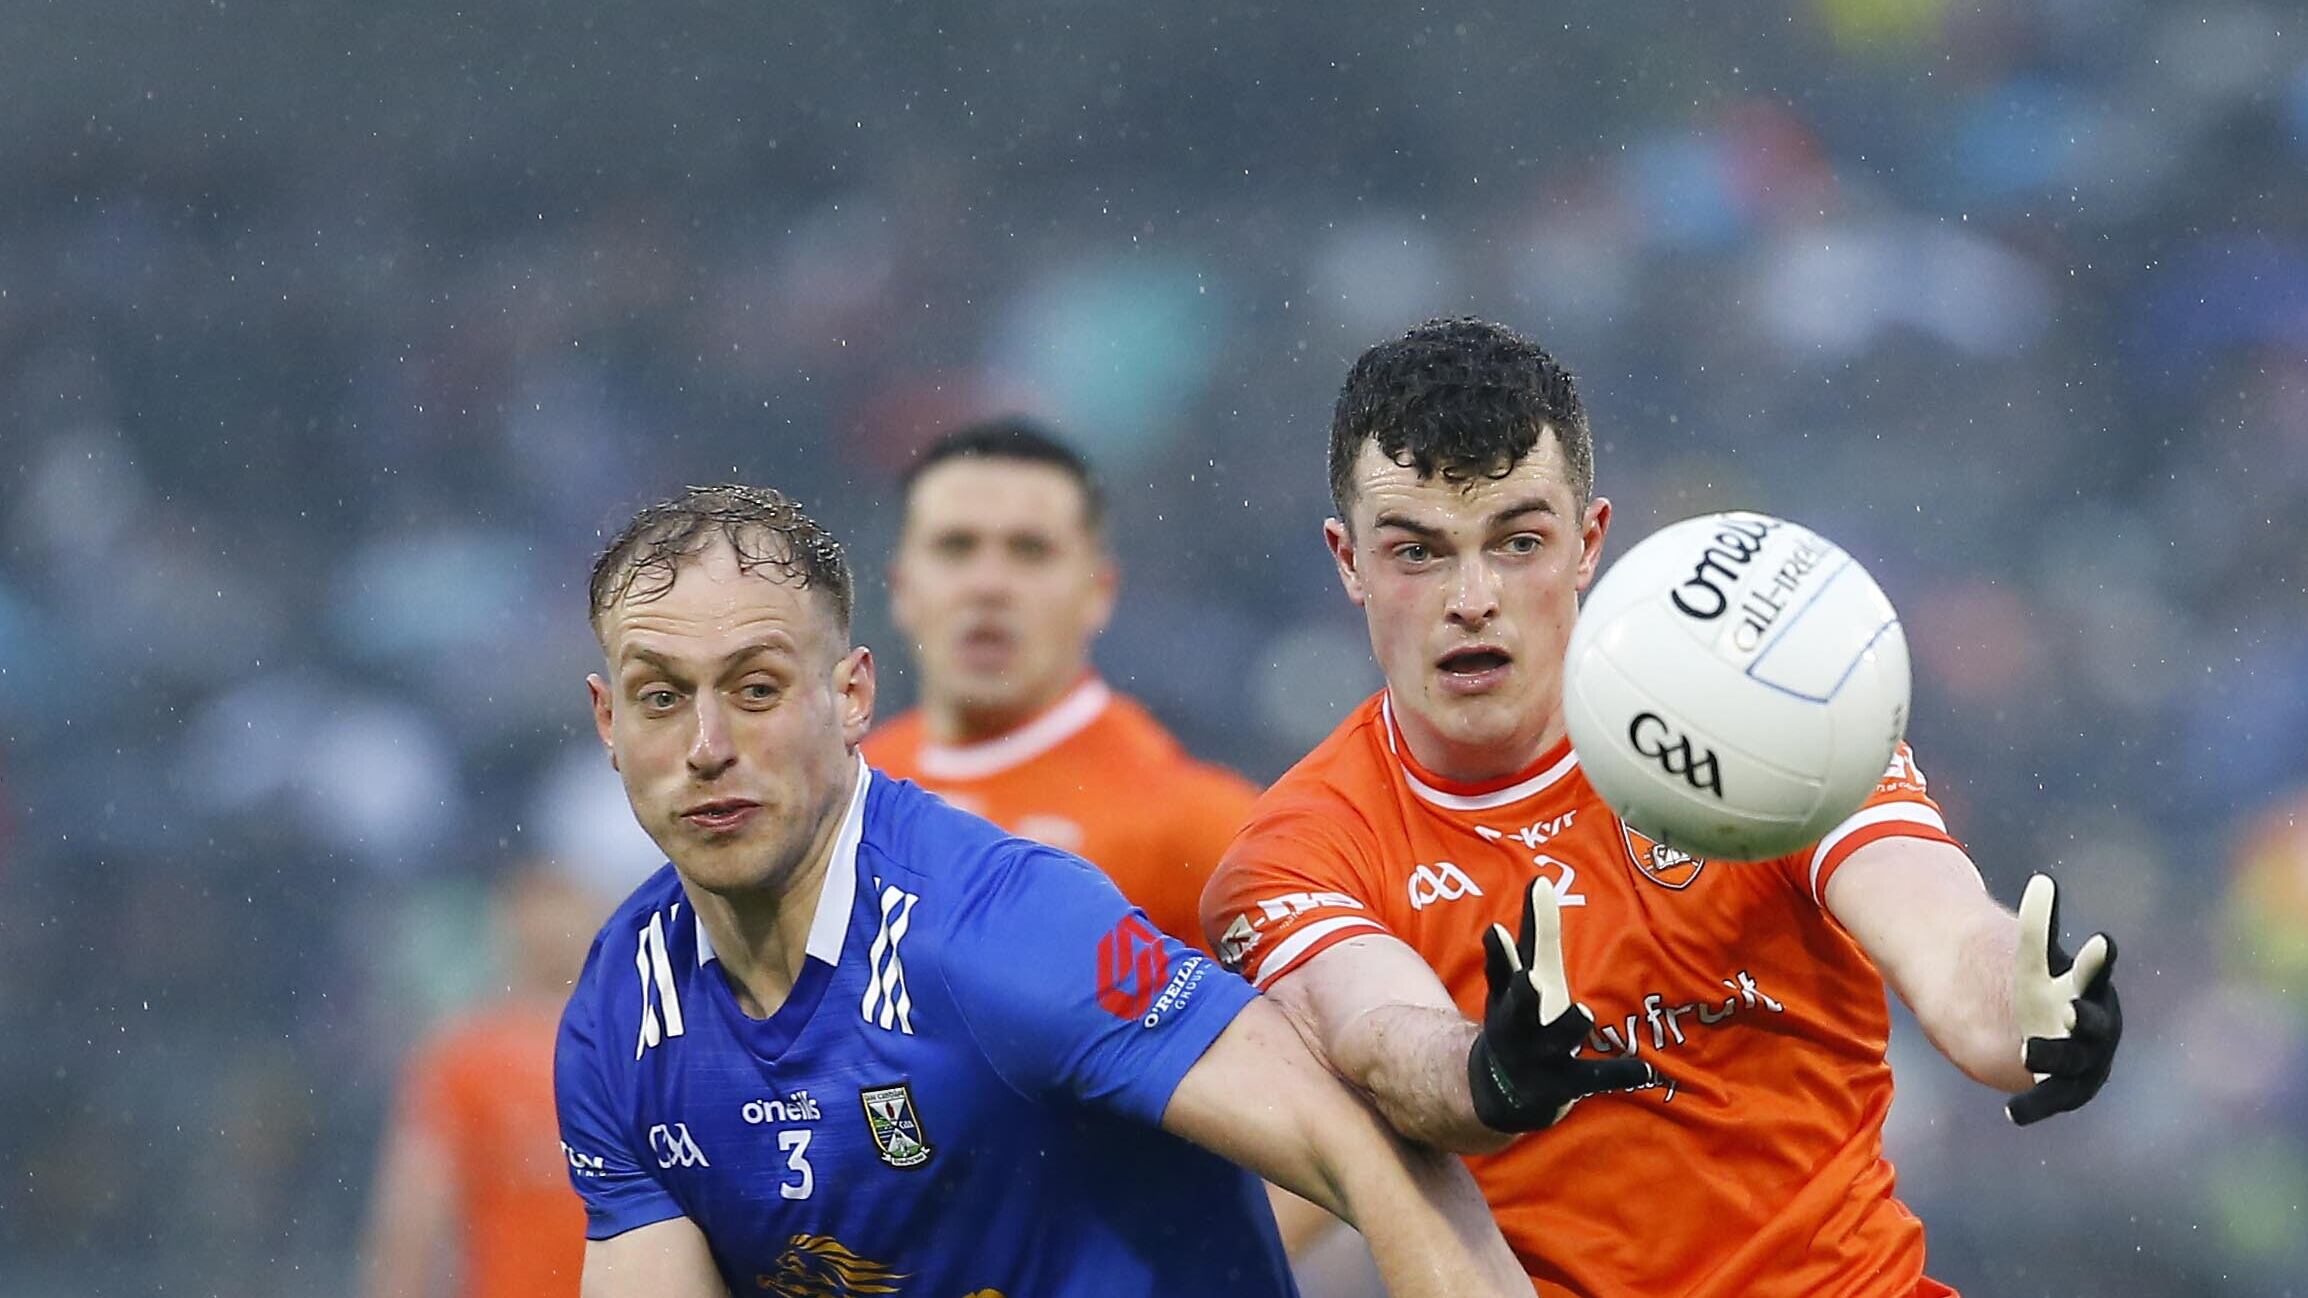 Conor O'Neill was solid in the Armagh defence. Picture: Philip Walsh